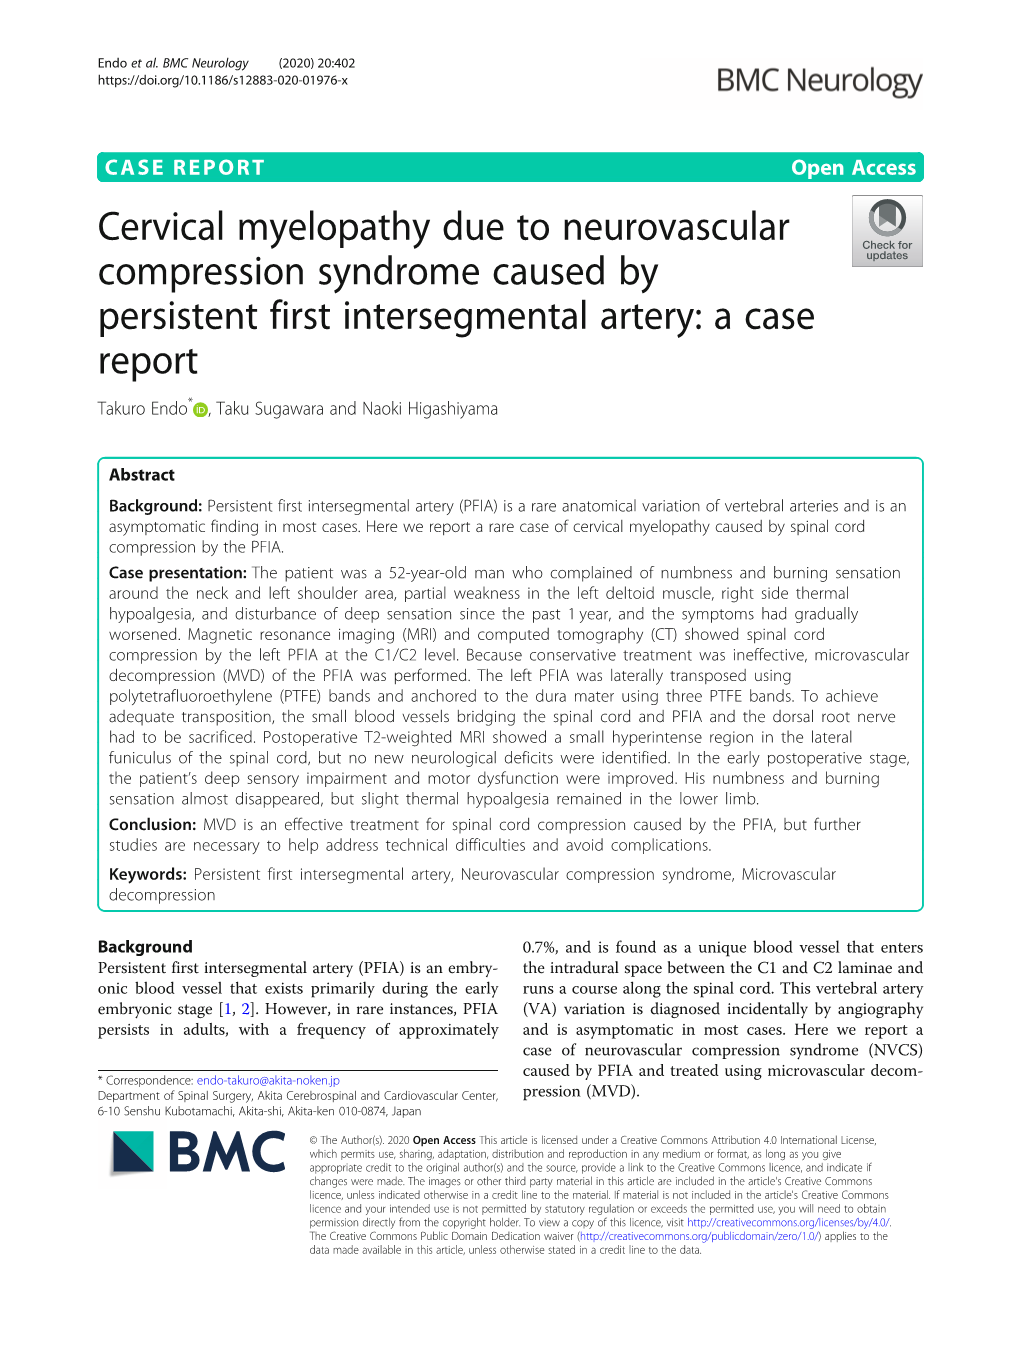 Cervical Myelopathy Due to Neurovascular